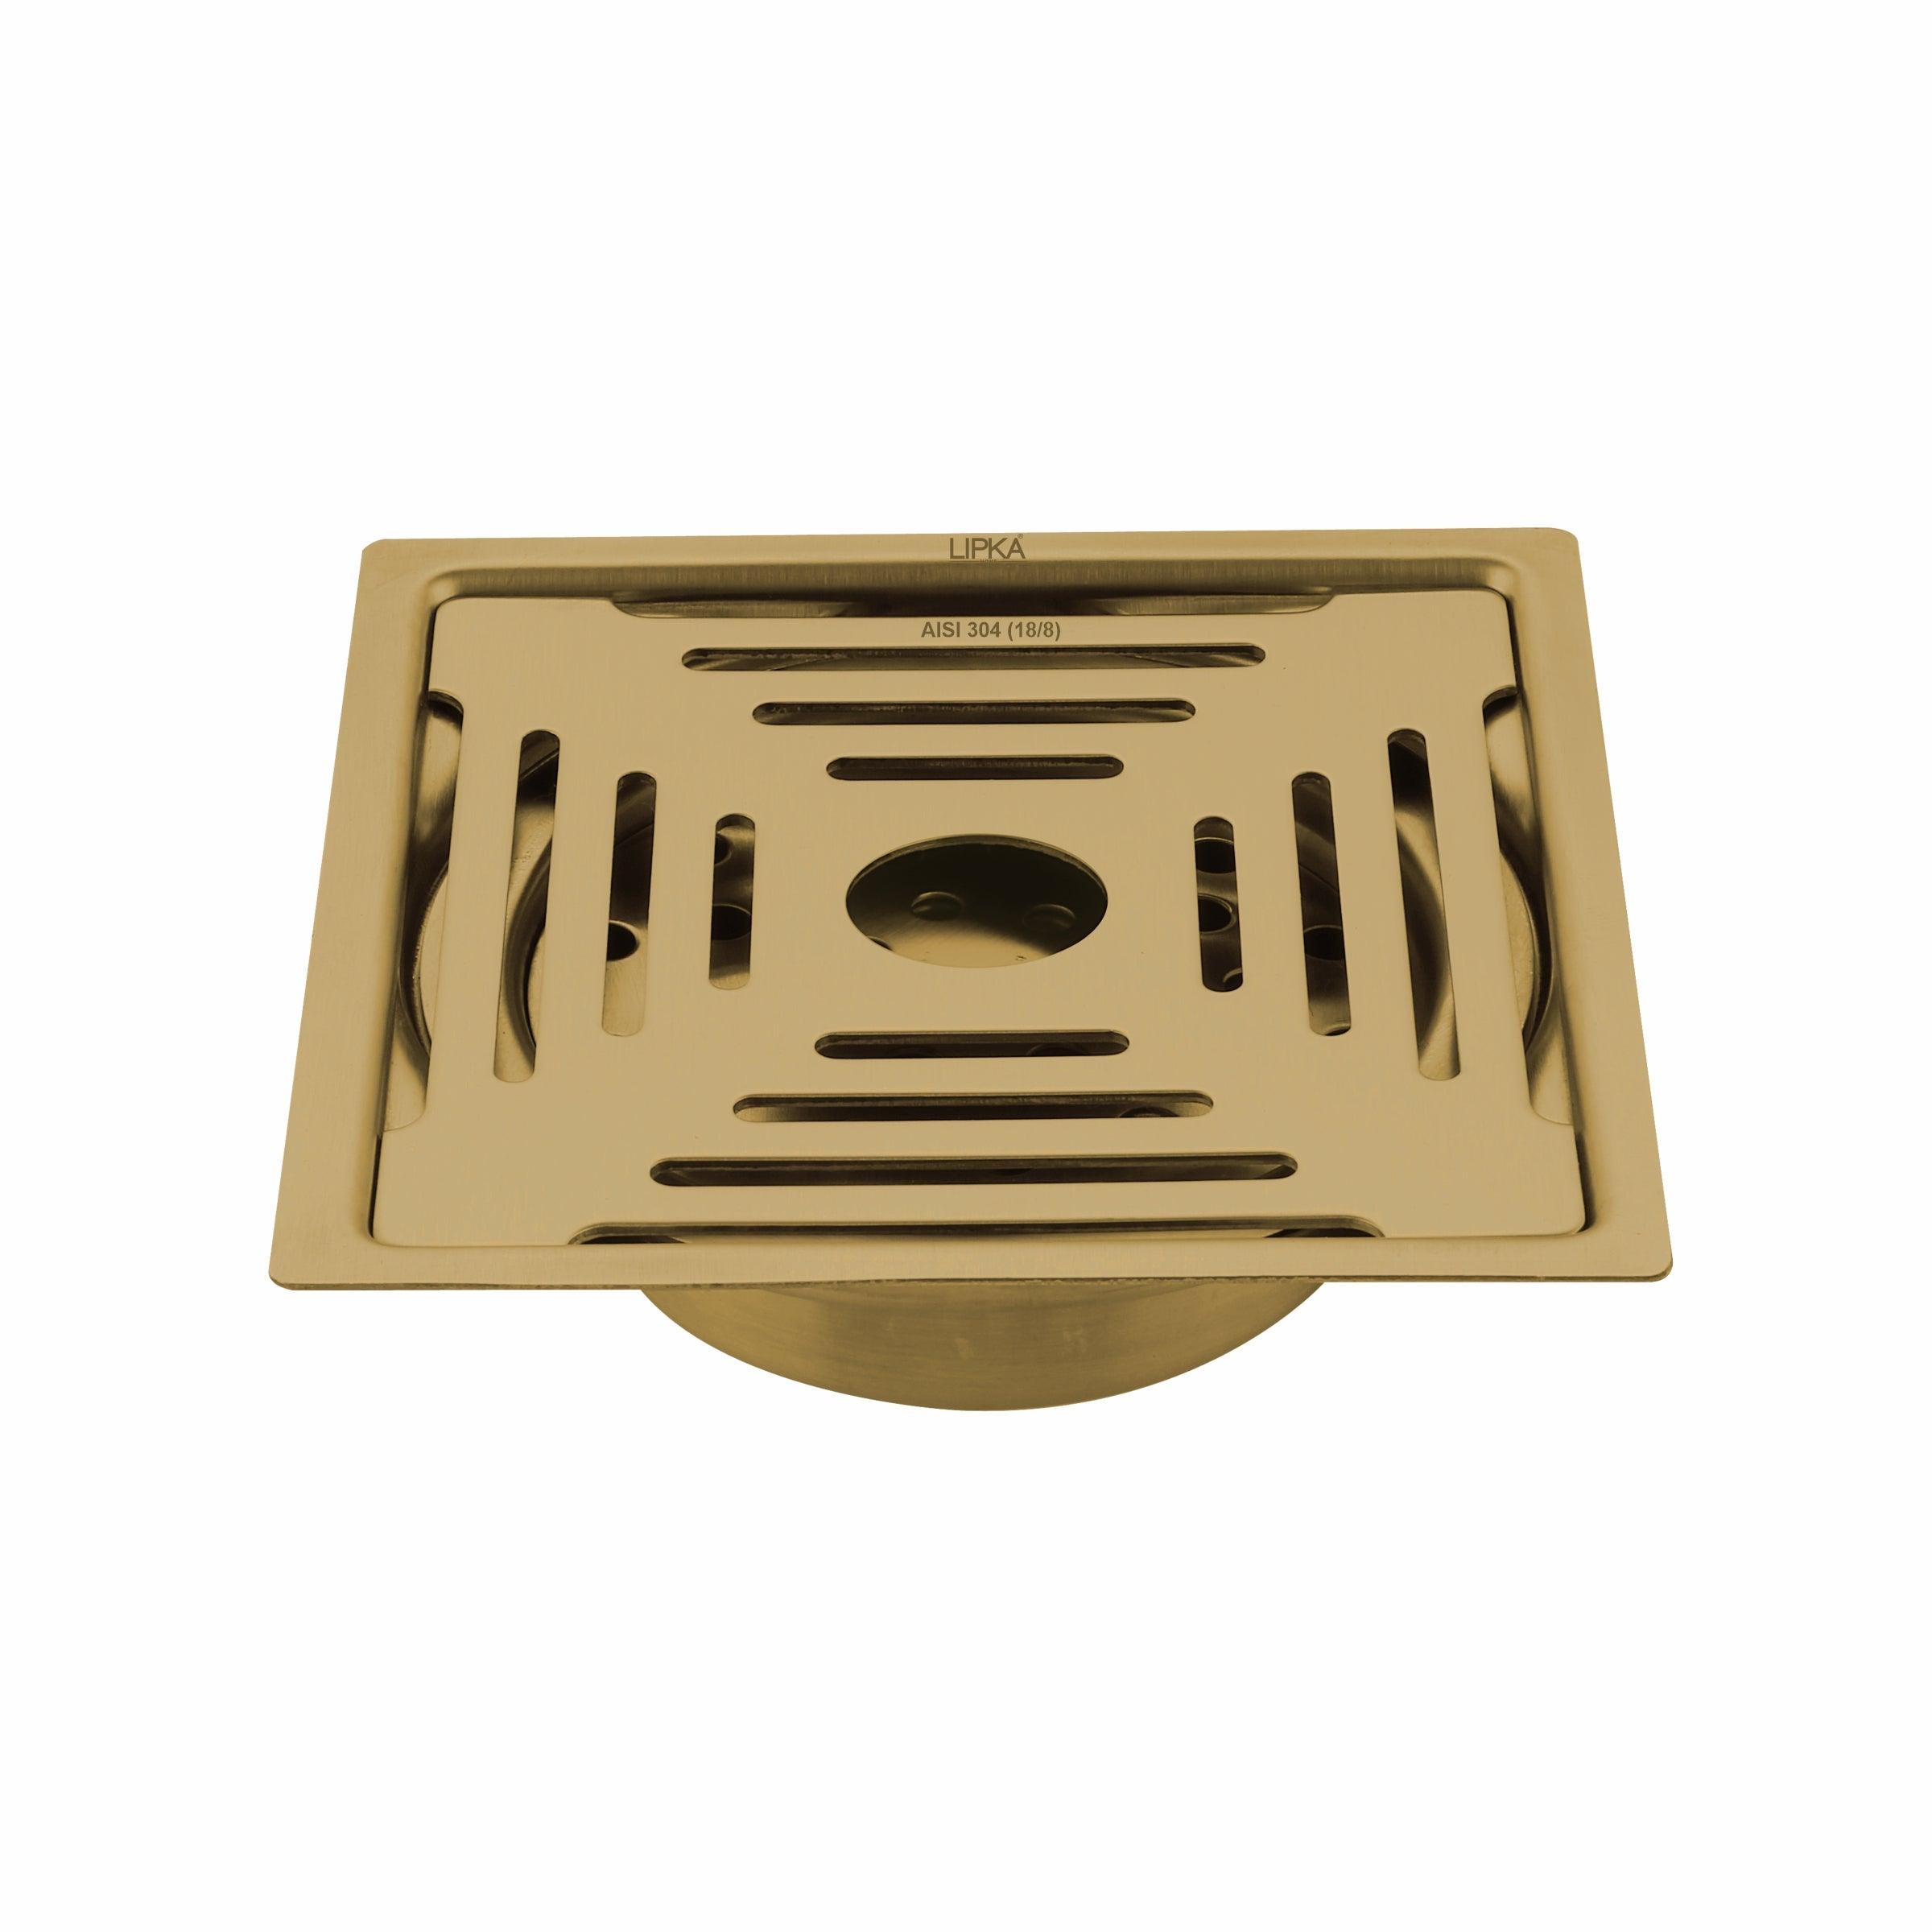 Green Exclusive Square Flat Cut Floor Drain in Yellow Gold PVD Coating (6 x 6 Inches) with Hole & Cockroach Trap - LIPKA